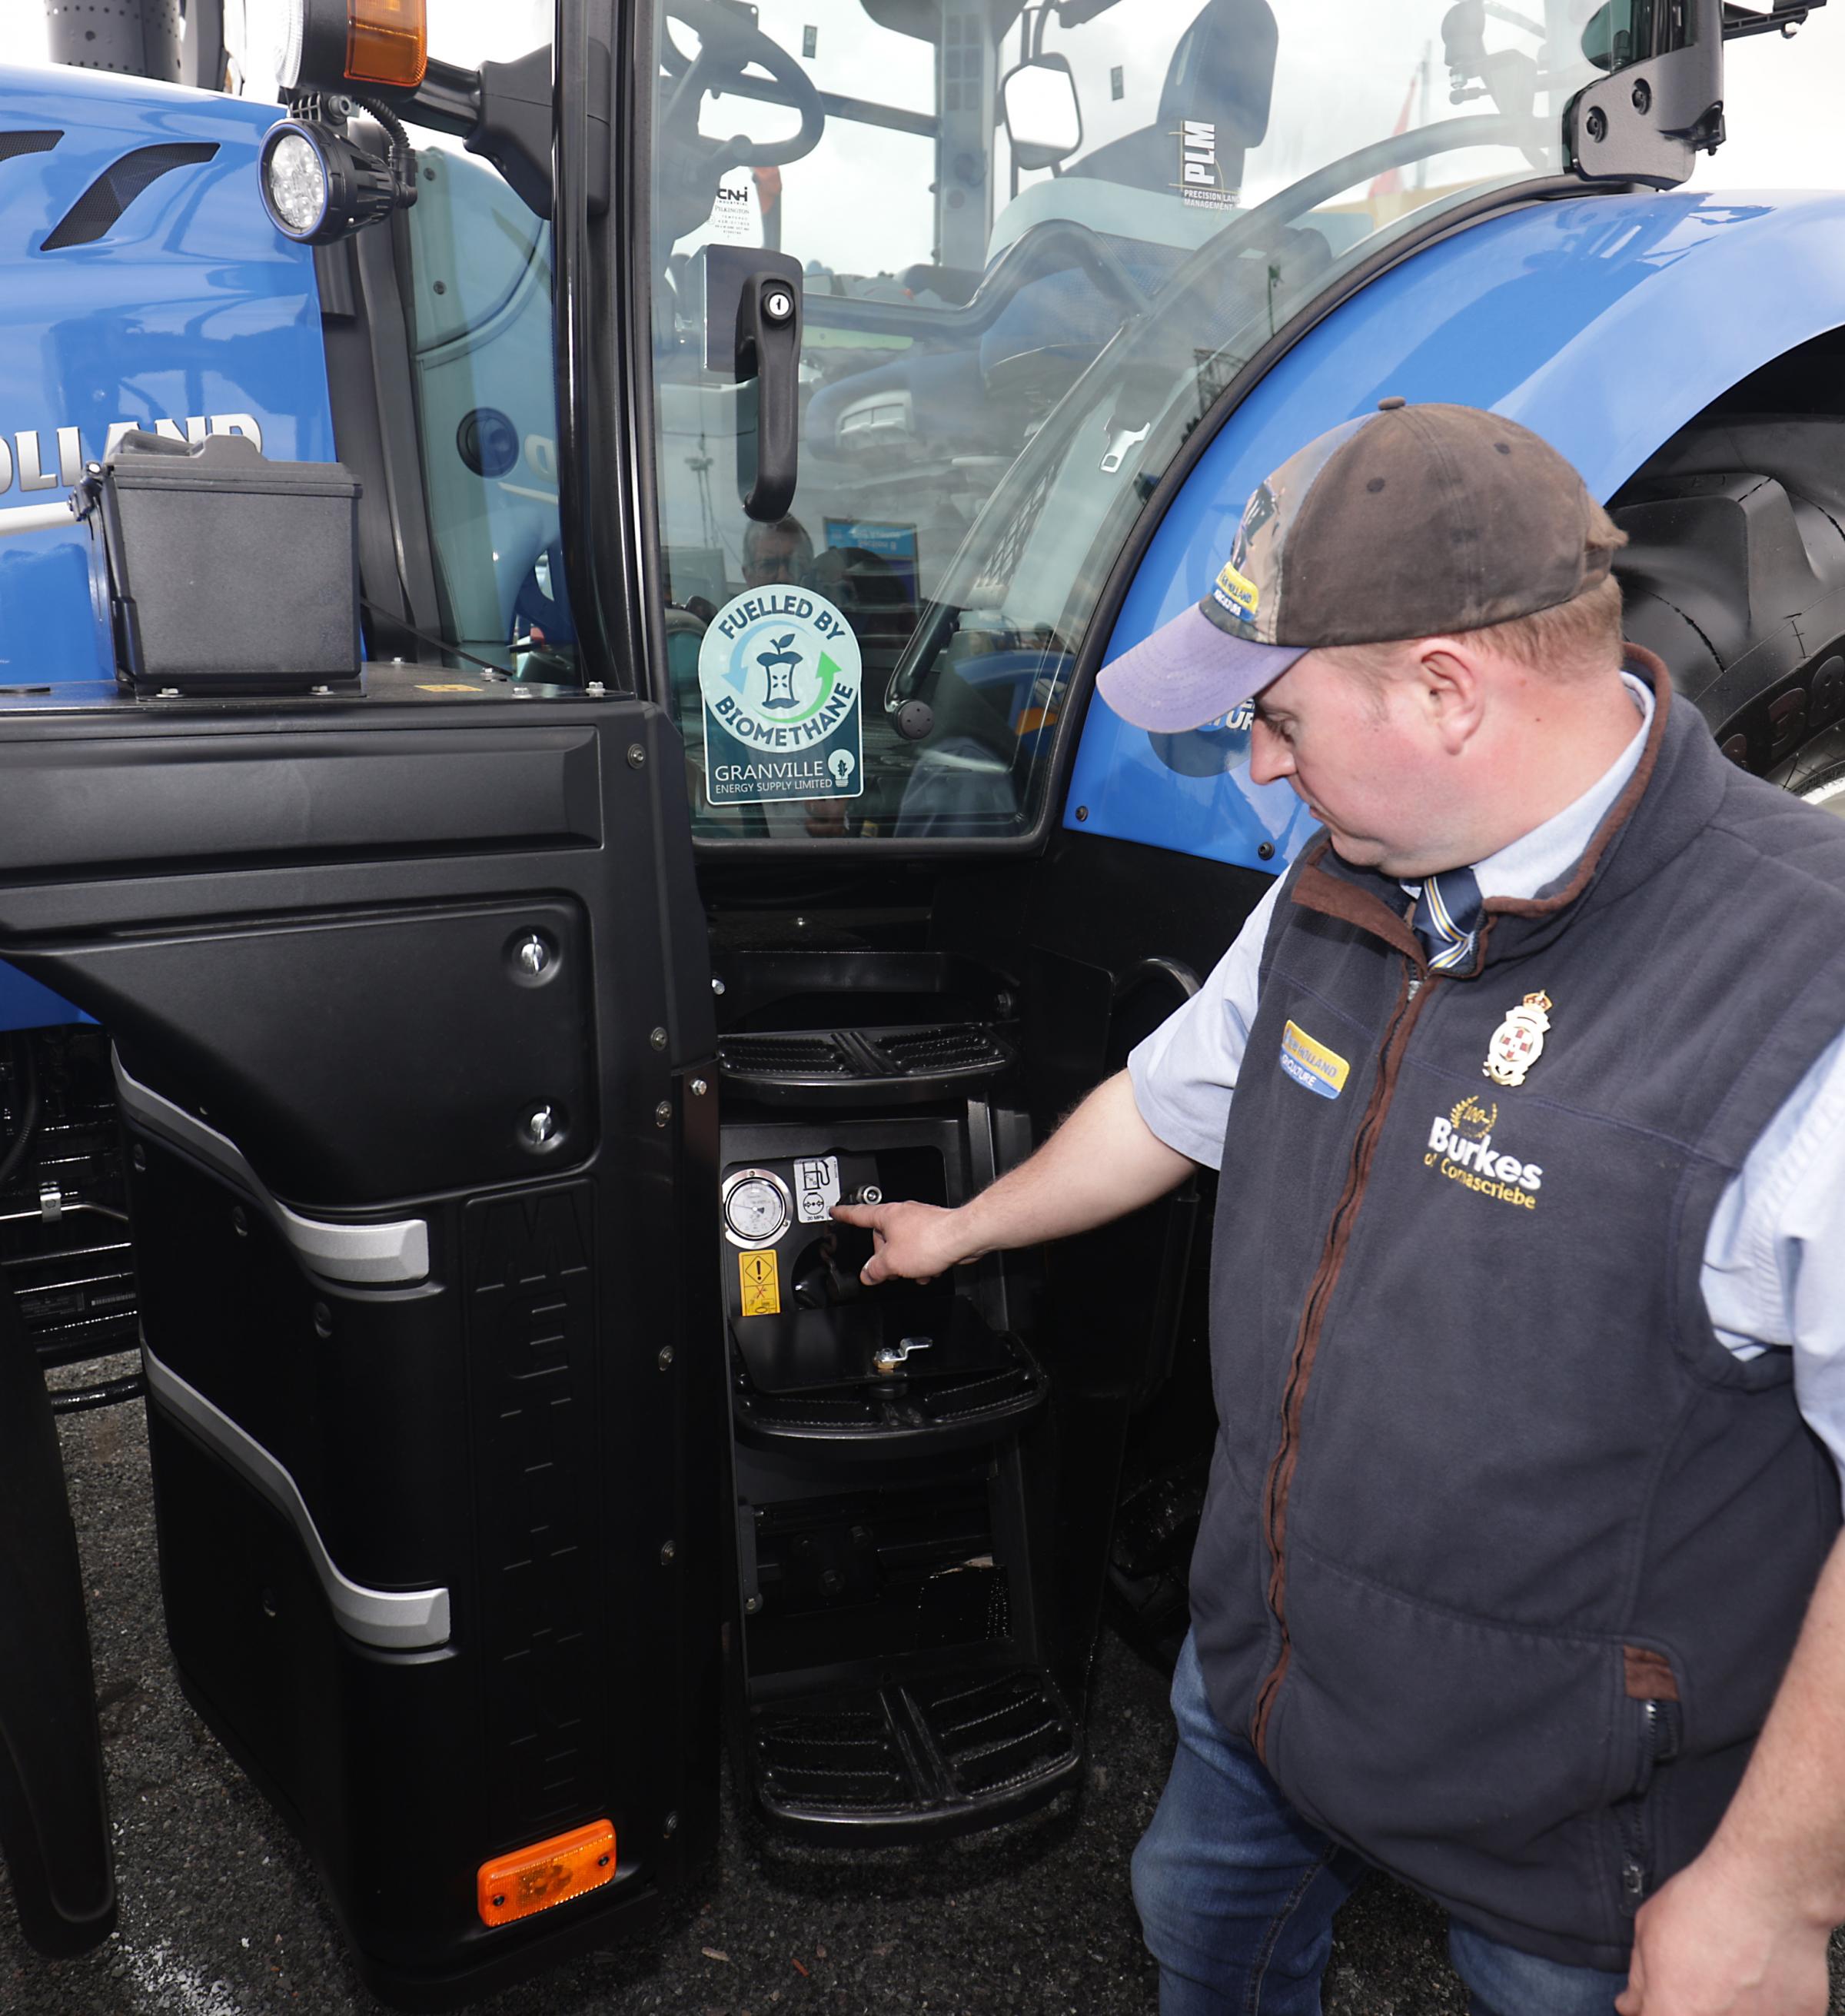 New Holland The Biomethane Tractor at Balmoral Show 2022.